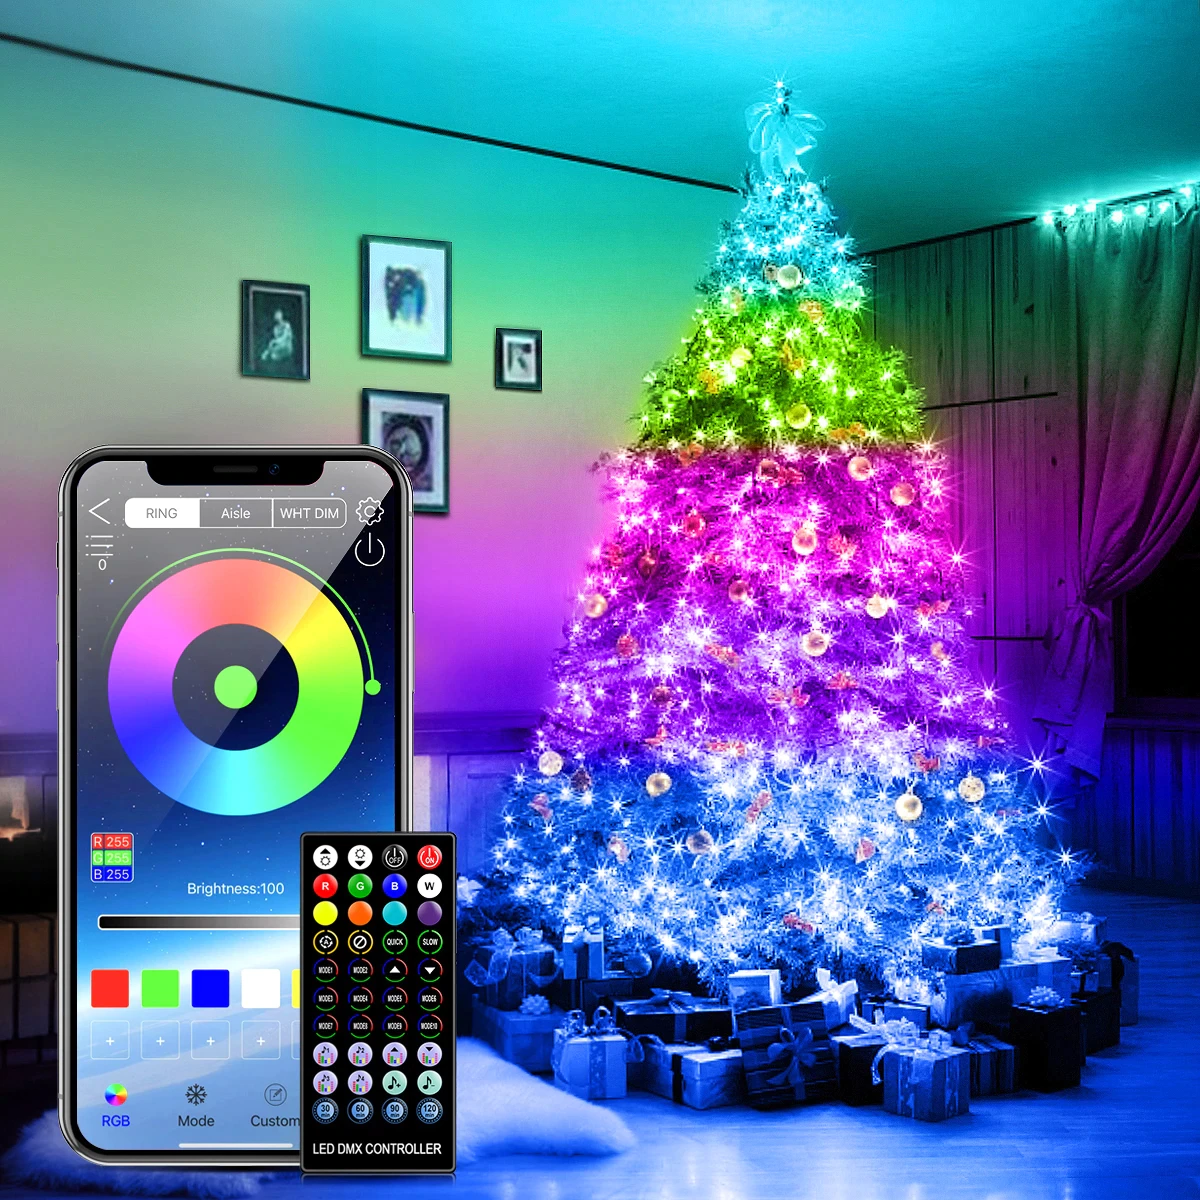 With-Bluetooth-Controller-Dream-Color-LED-Lights-String-USB-RGB-Fairy-Lights-Outdoor-Garden-New-Year.jpg_Q90.jpg_